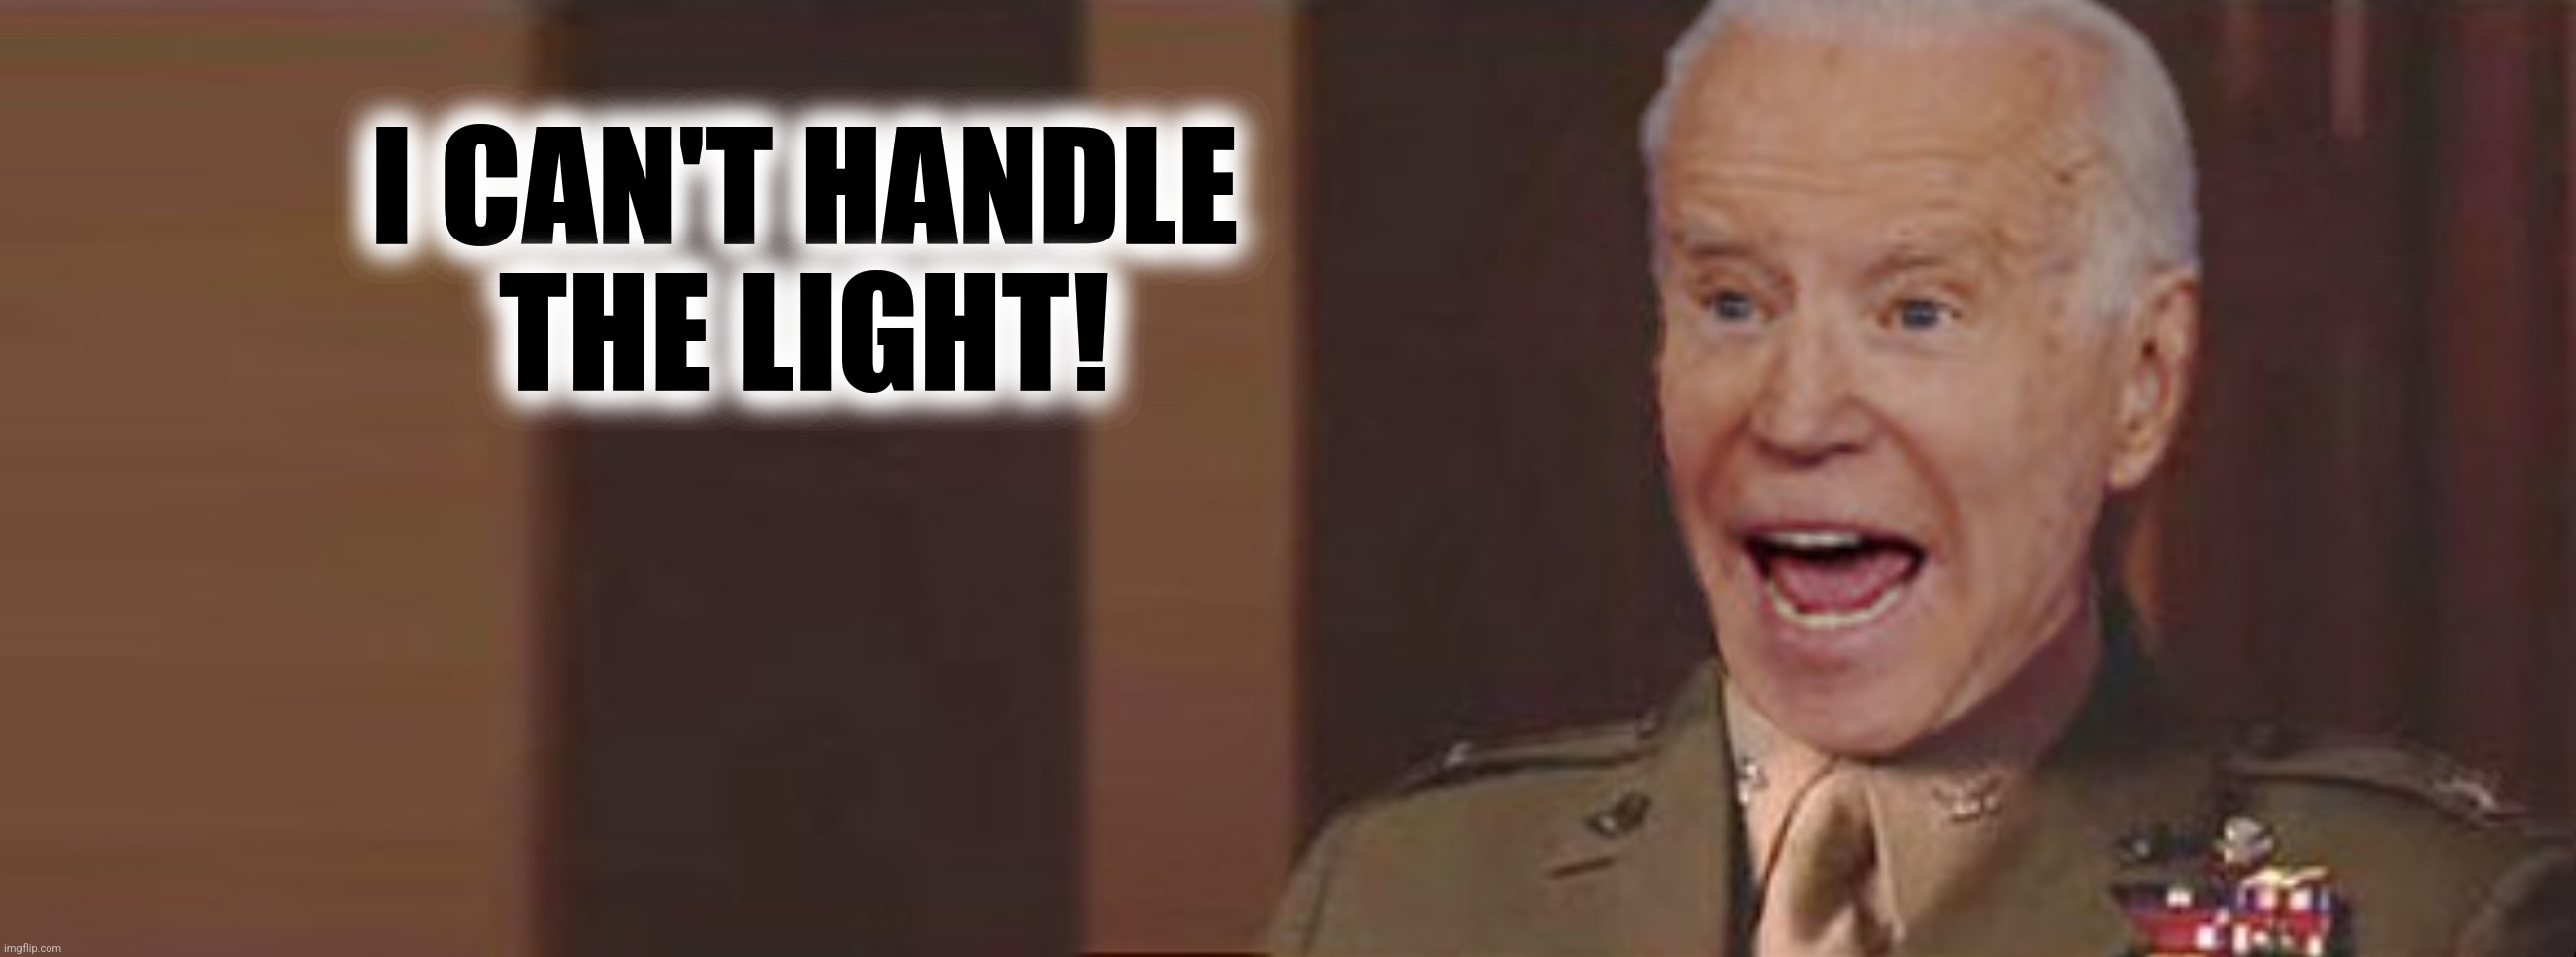 I CAN'T HANDLE
THE LIGHT! | made w/ Imgflip meme maker